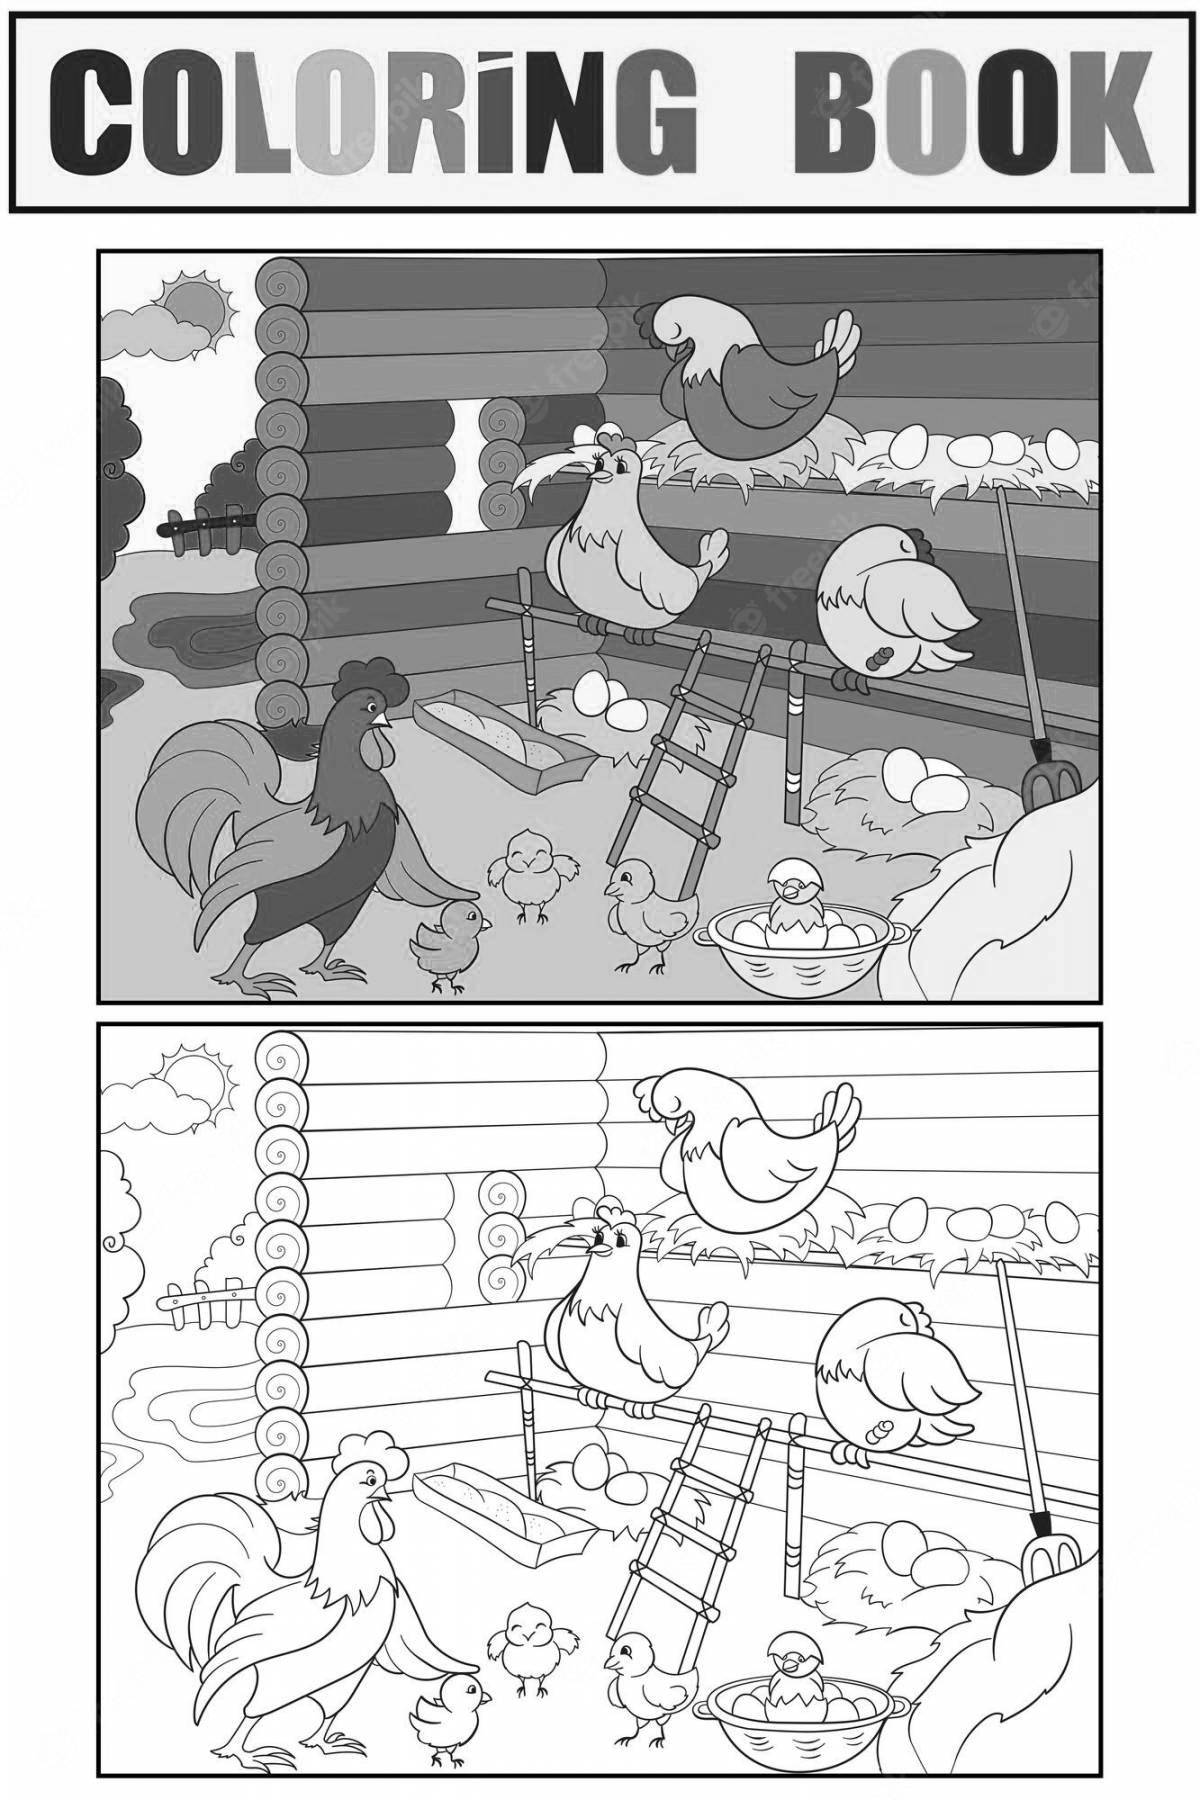 Amazing chicken coop coloring page for kids